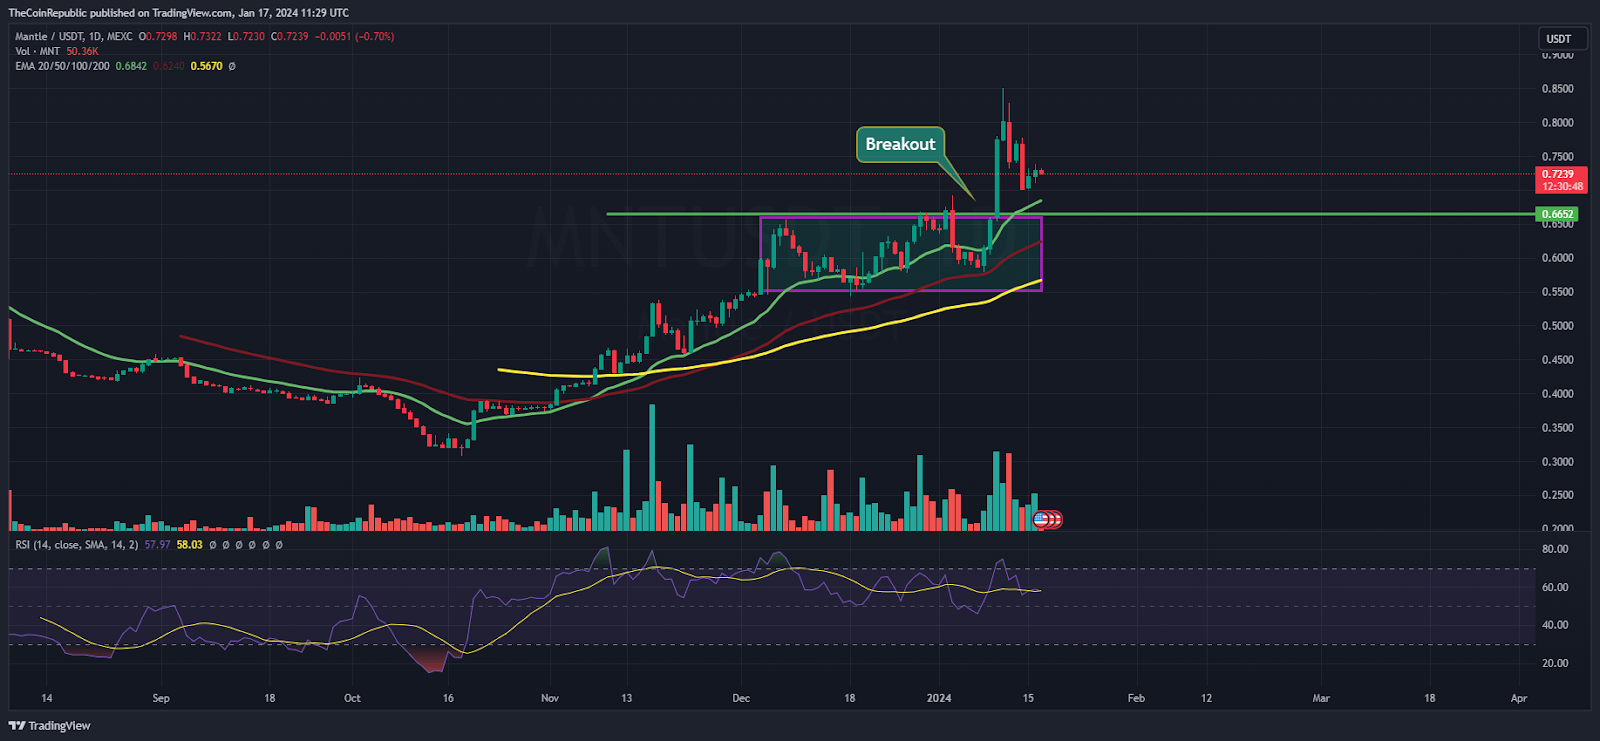 Mantle Coin Price Displays a Breakout; Will It Reach $1?